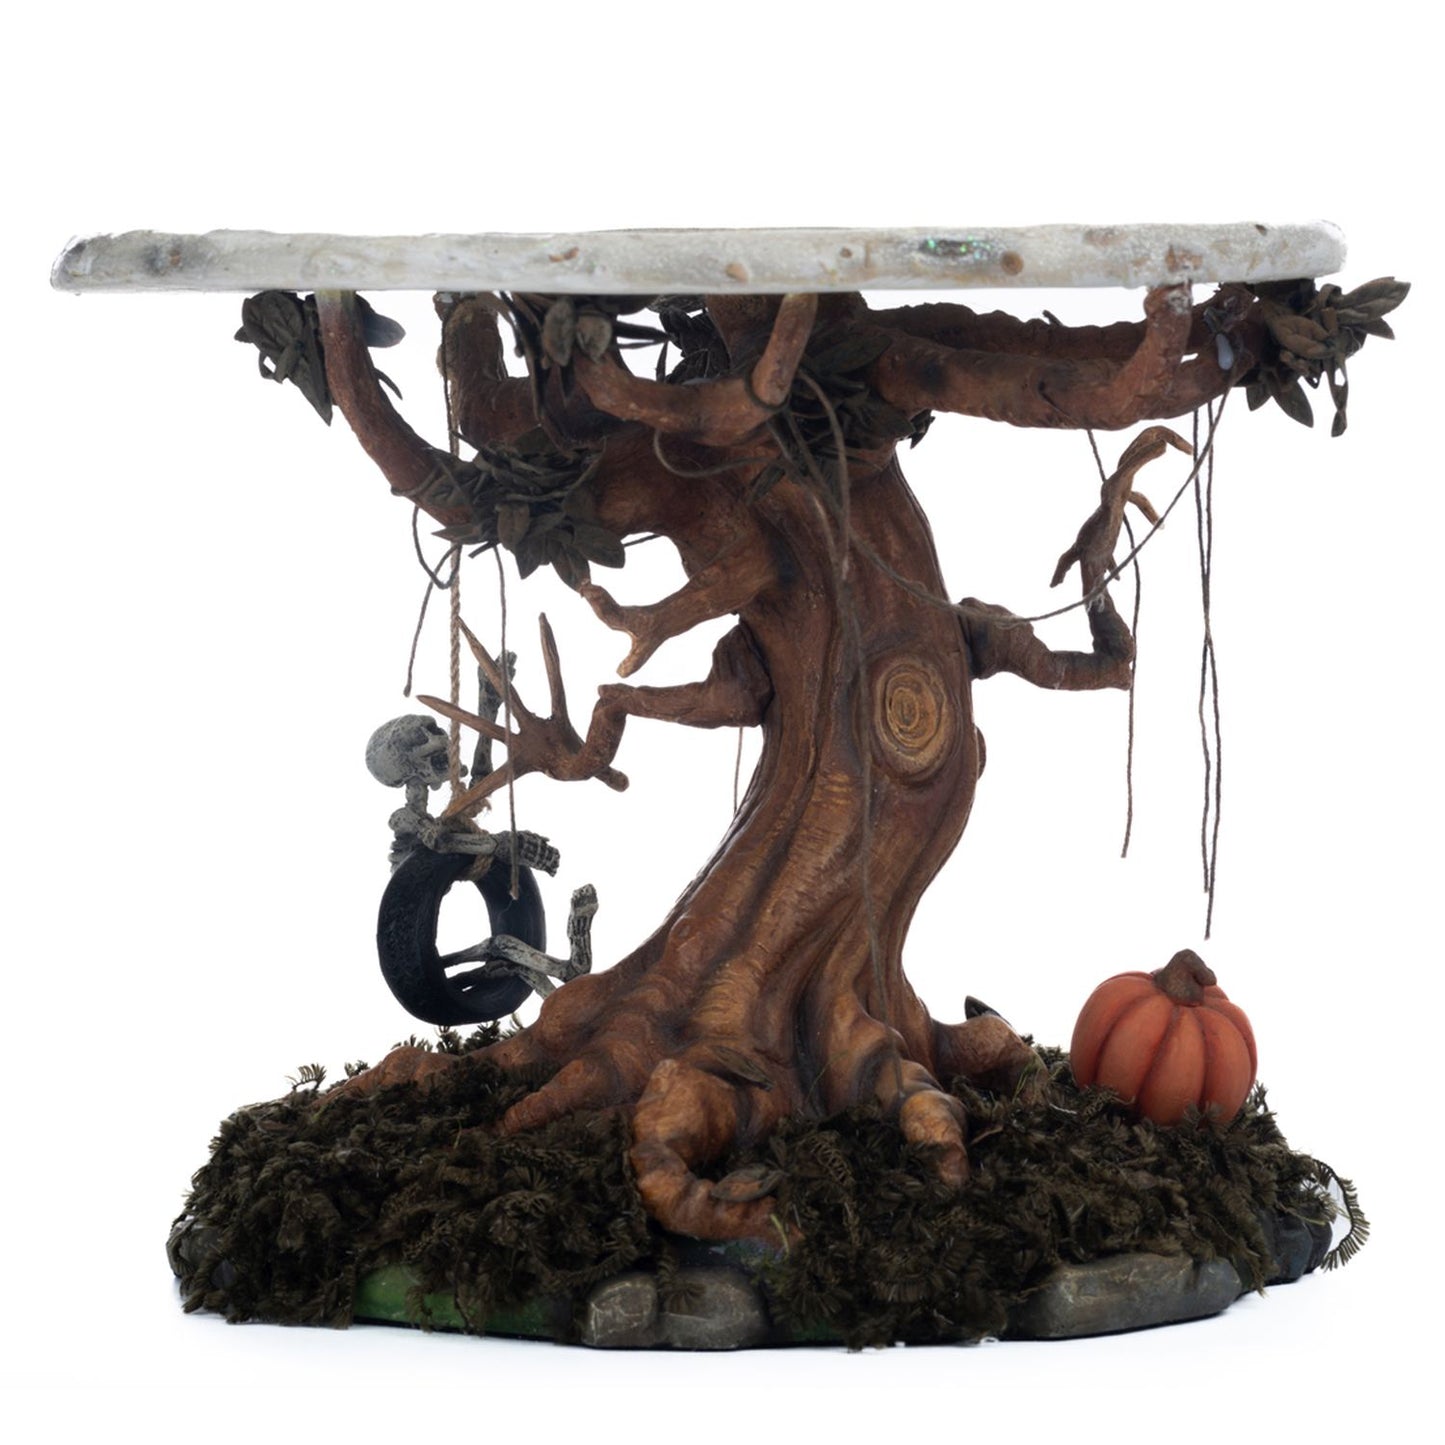 Katherine's Collection Halloween Hollow 11"x7" Tree Cake Plate, Brown/Green Resin